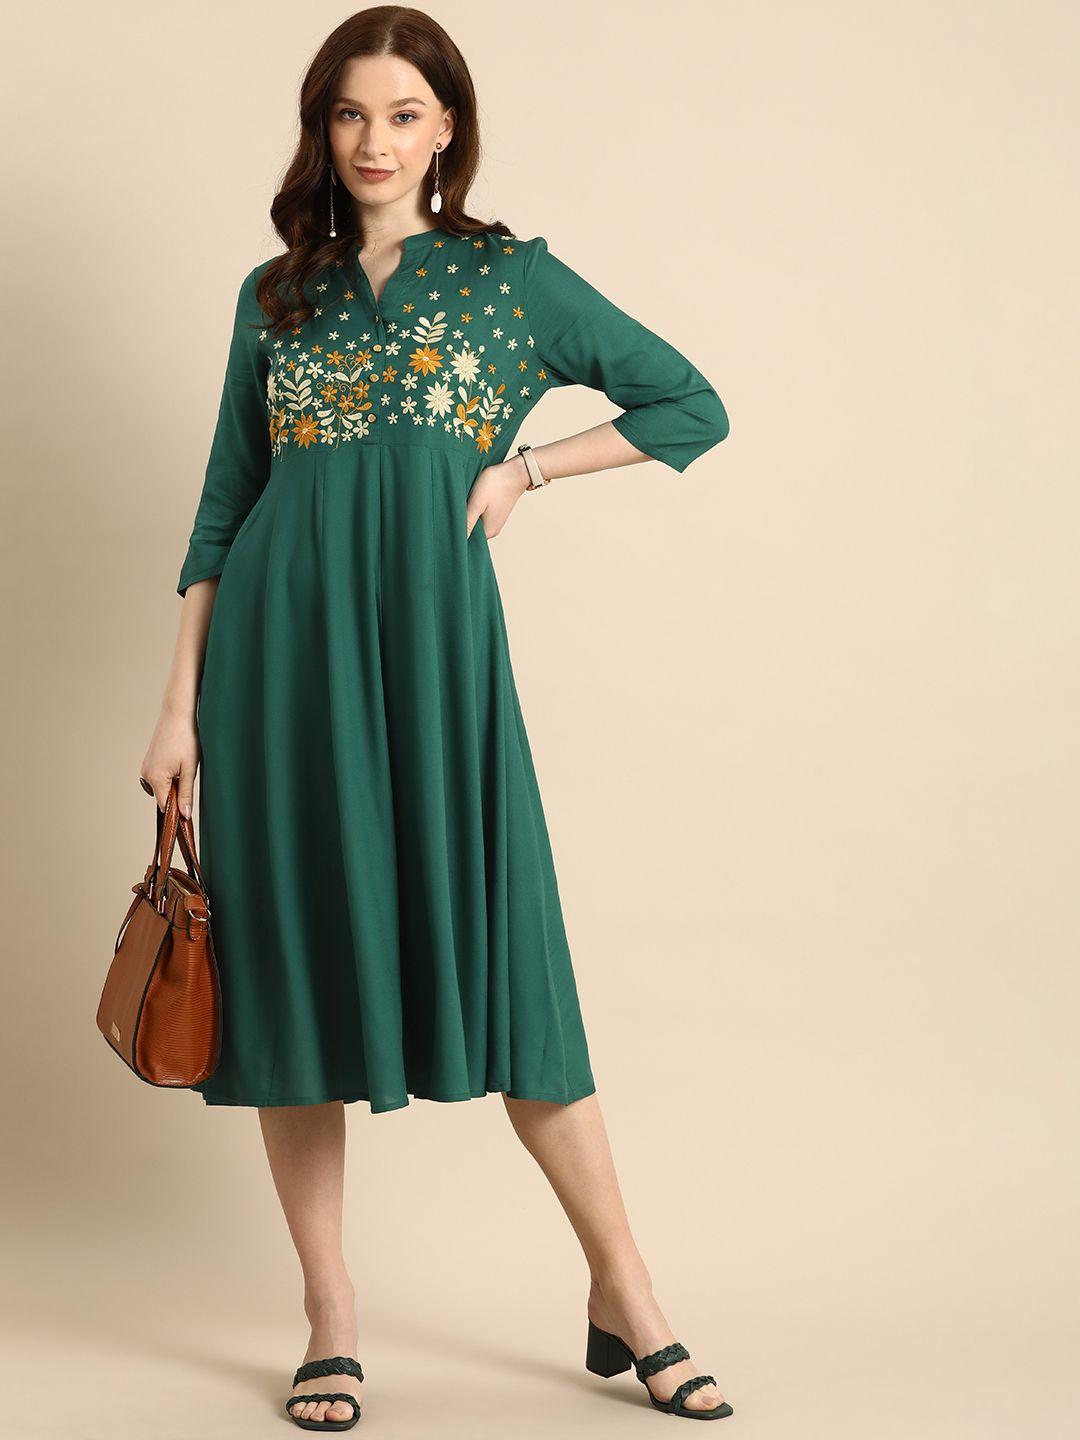 all about you green & beige floral embroidered a-line midi dress